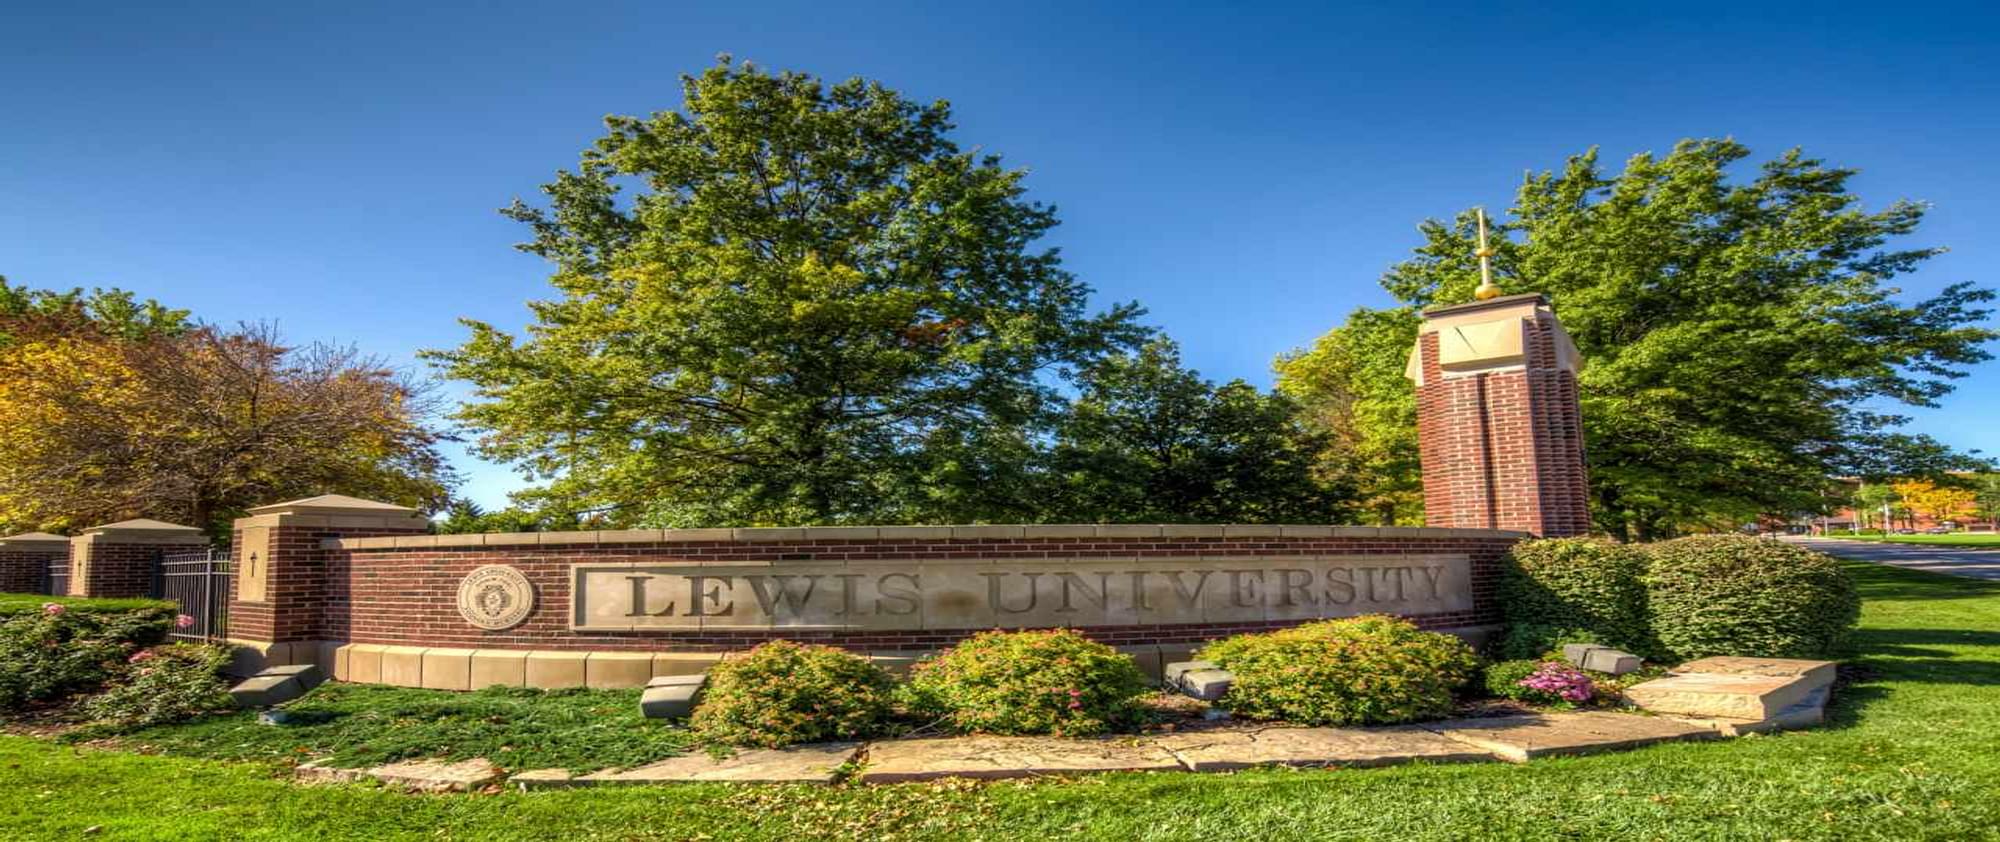 Lewis University, Romeoville Review by Students & Alumni & Ranking